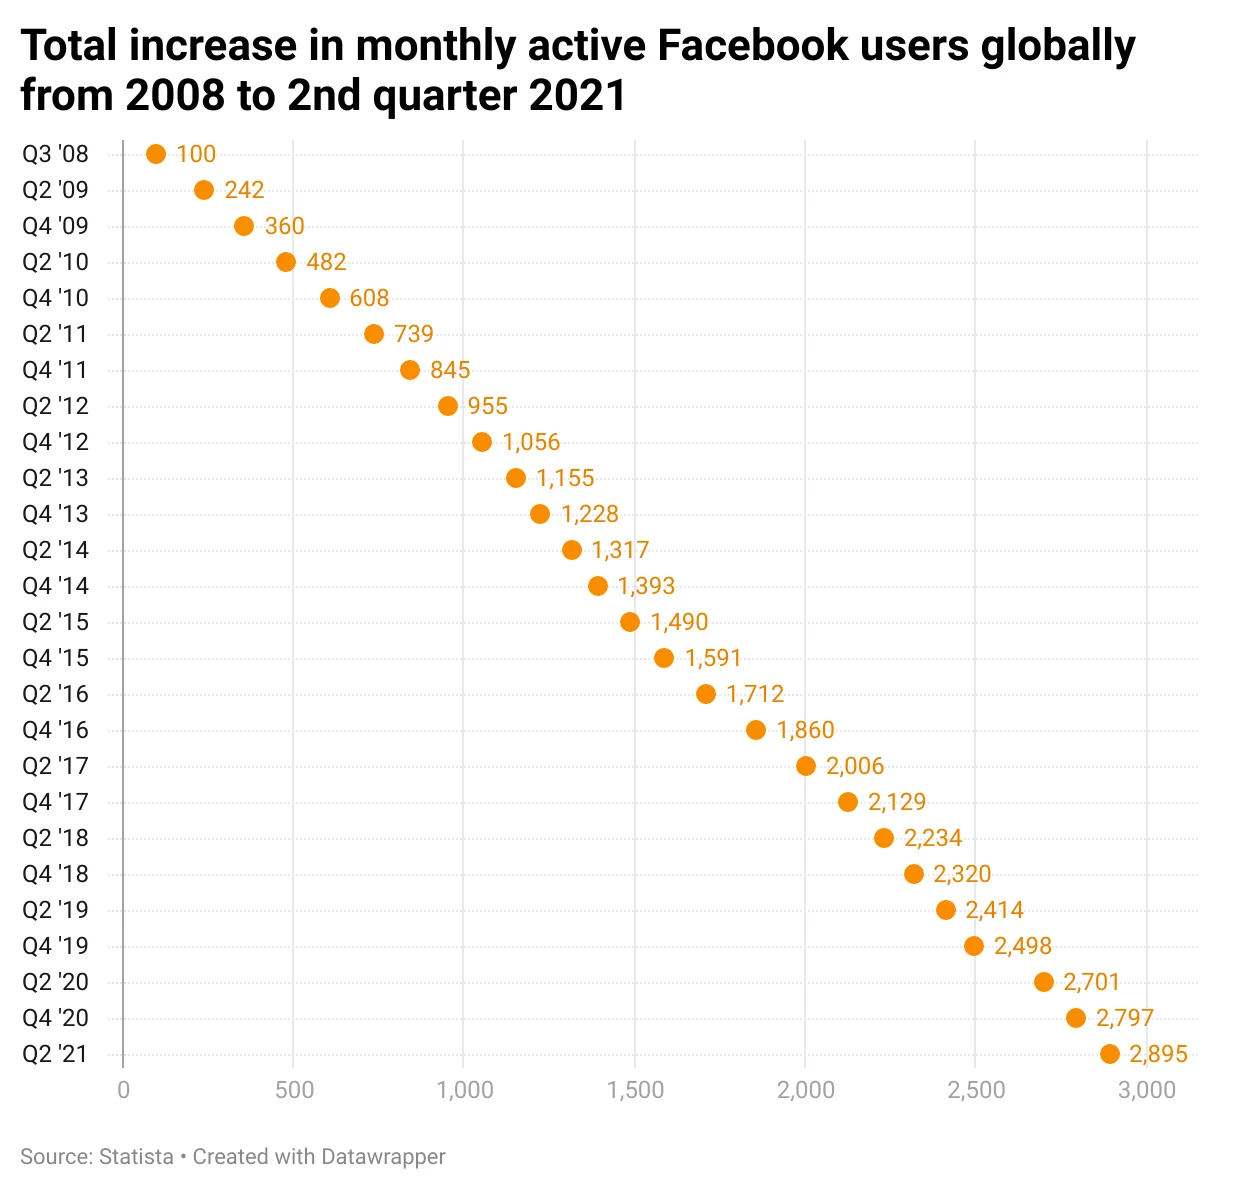 Facebook monthly active users from 2008 to 2021 